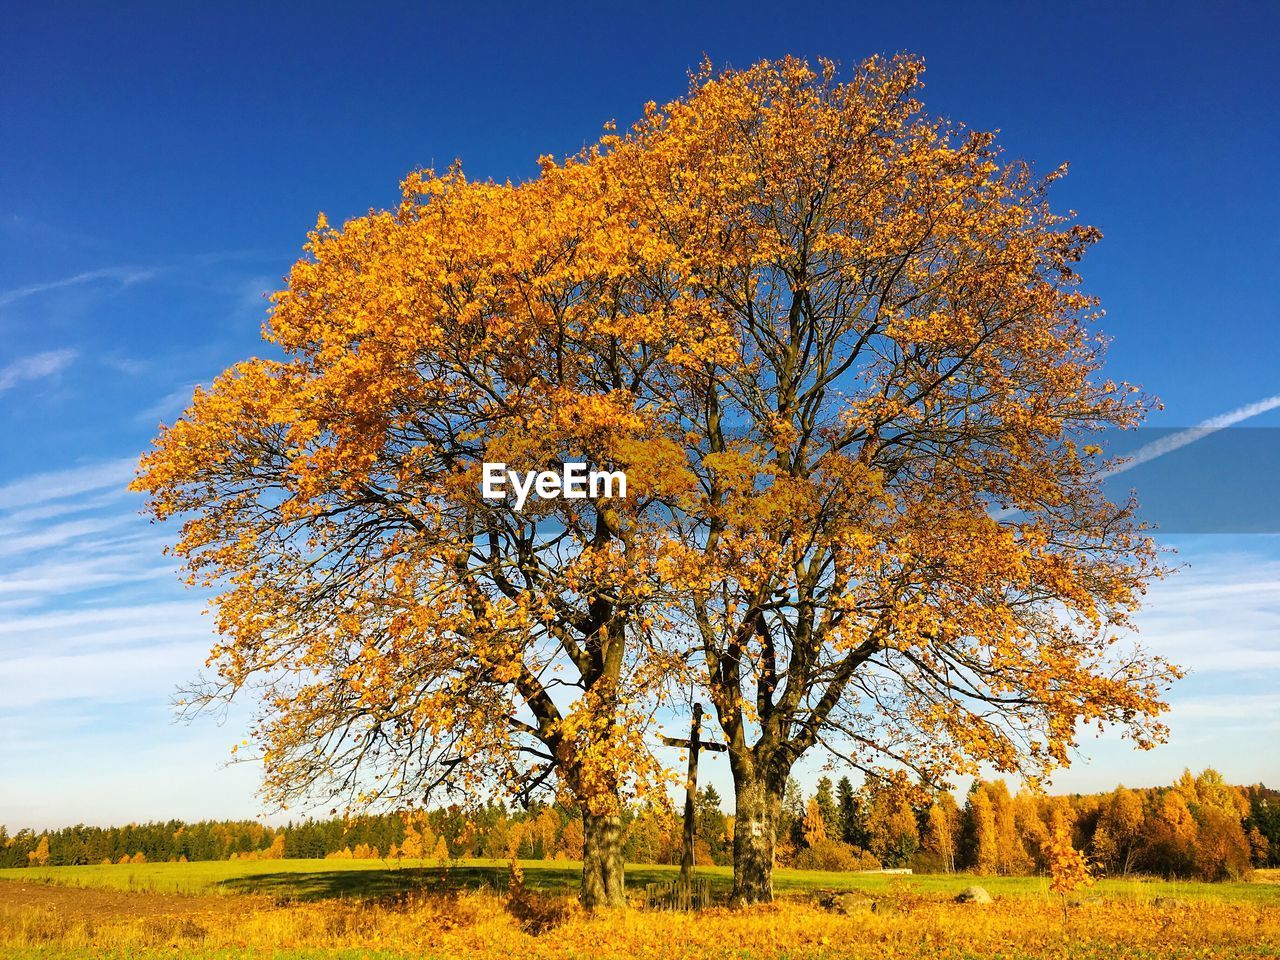 Autumn trees growing on field against sky